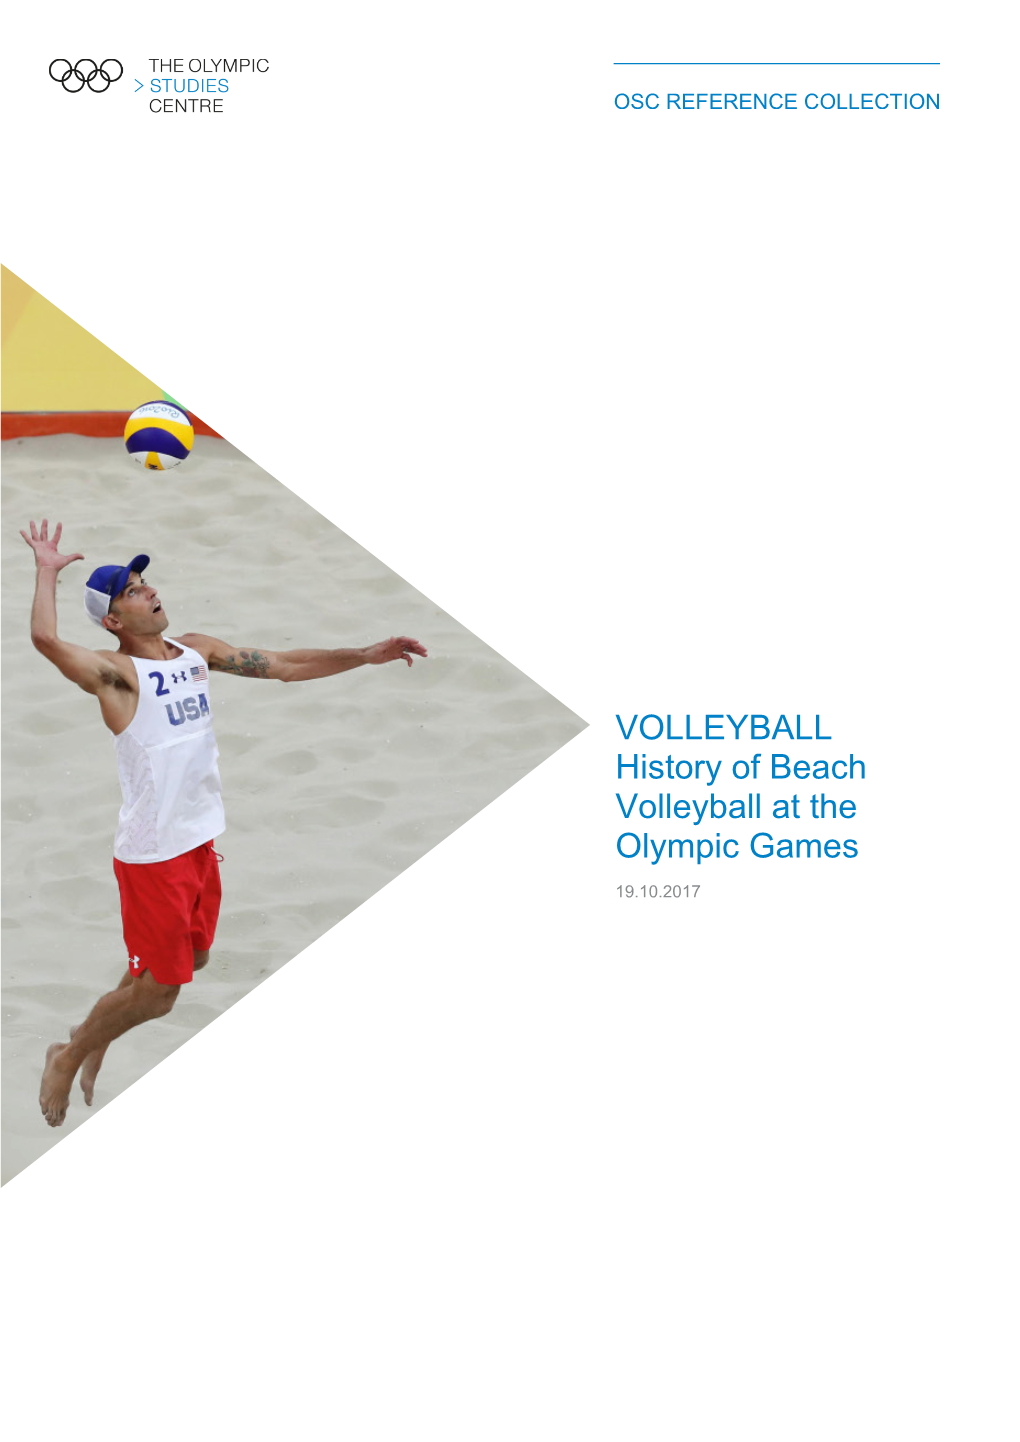 History of Beach Volleyball at the Olympic Games